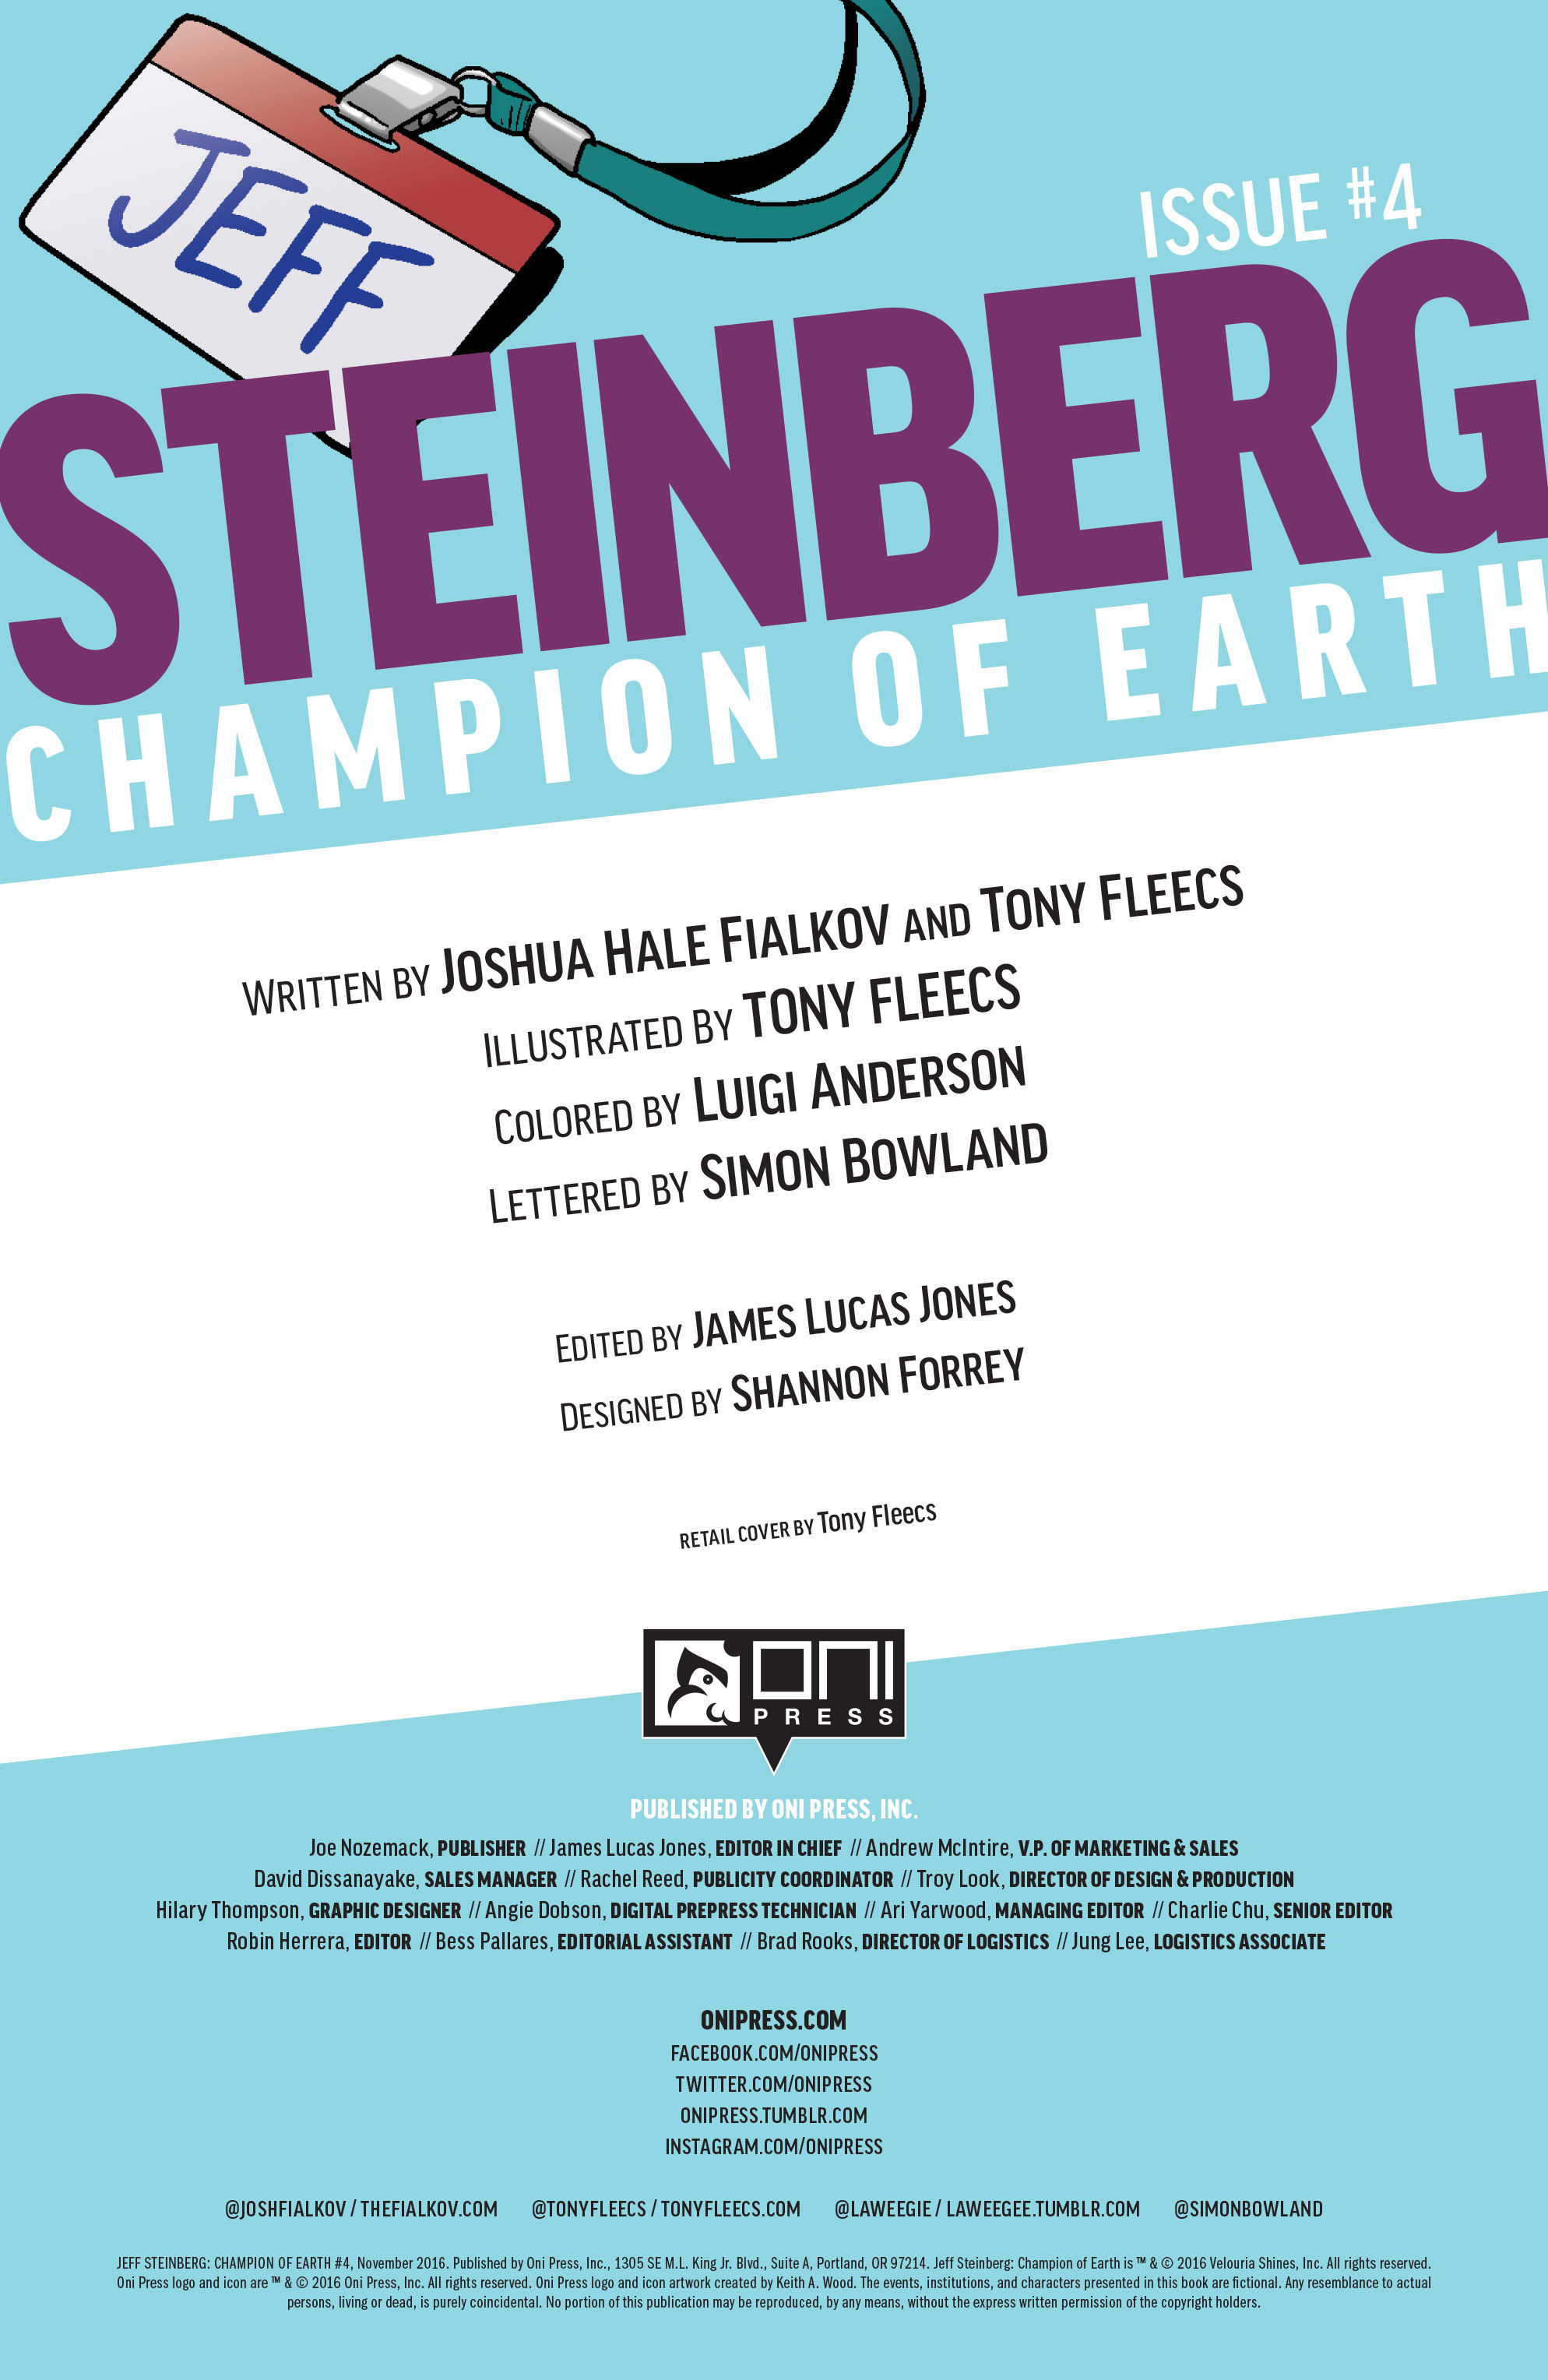 Read online Jeff Steinberg Champion of Earth comic -  Issue #4 - 2